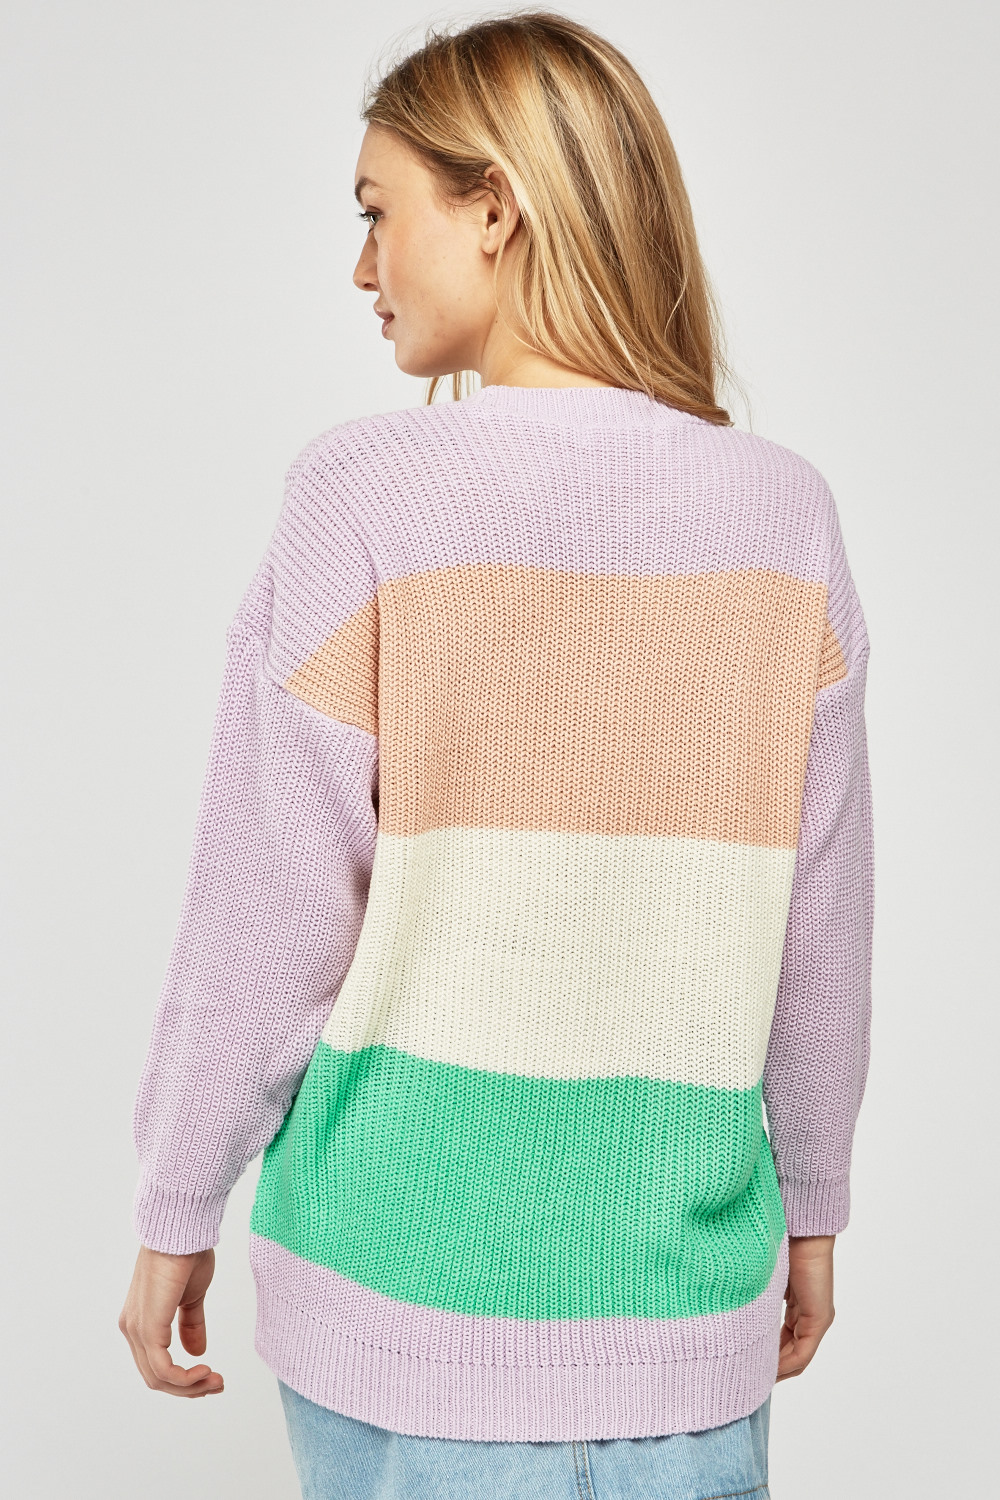 Colour Block Knitted Jumper - Just $3